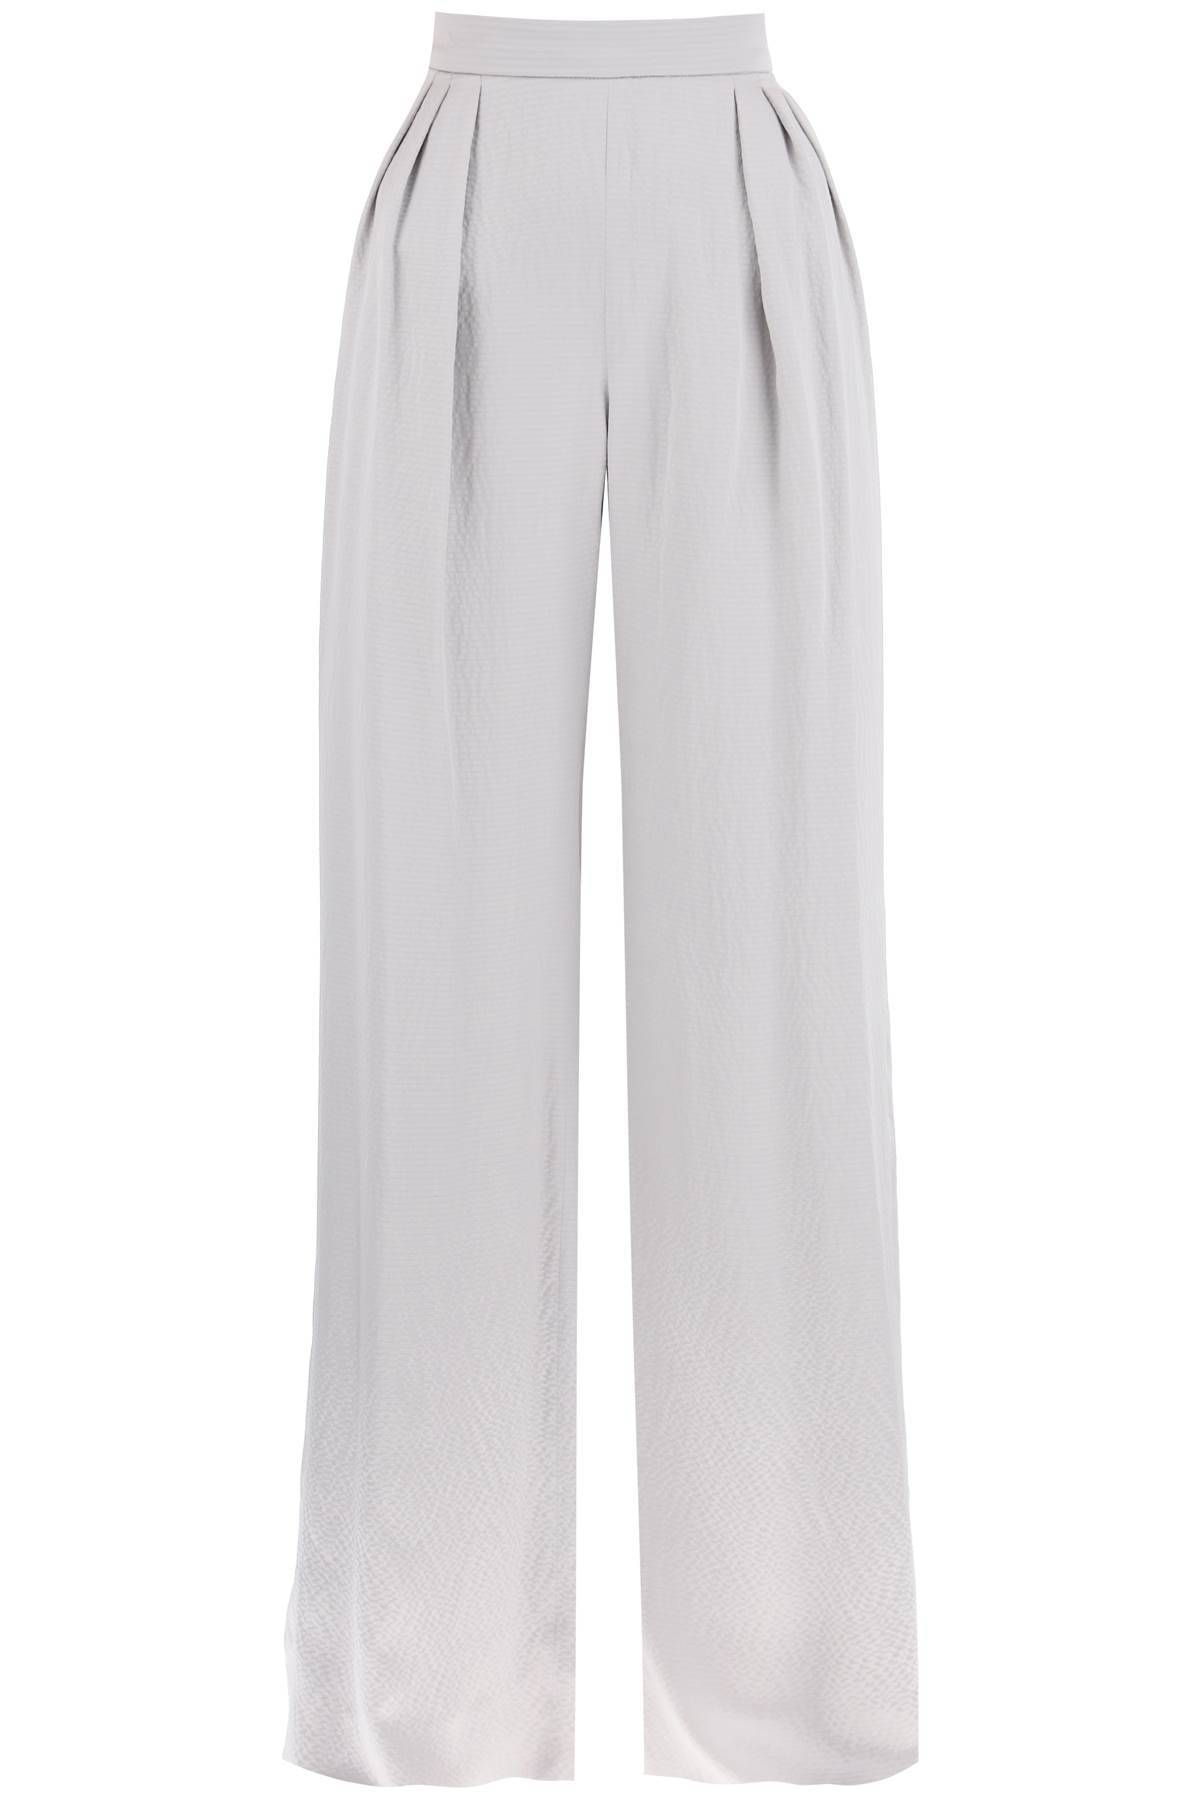 Max Mara Uncino Satin Trousers With Pleats In Silver